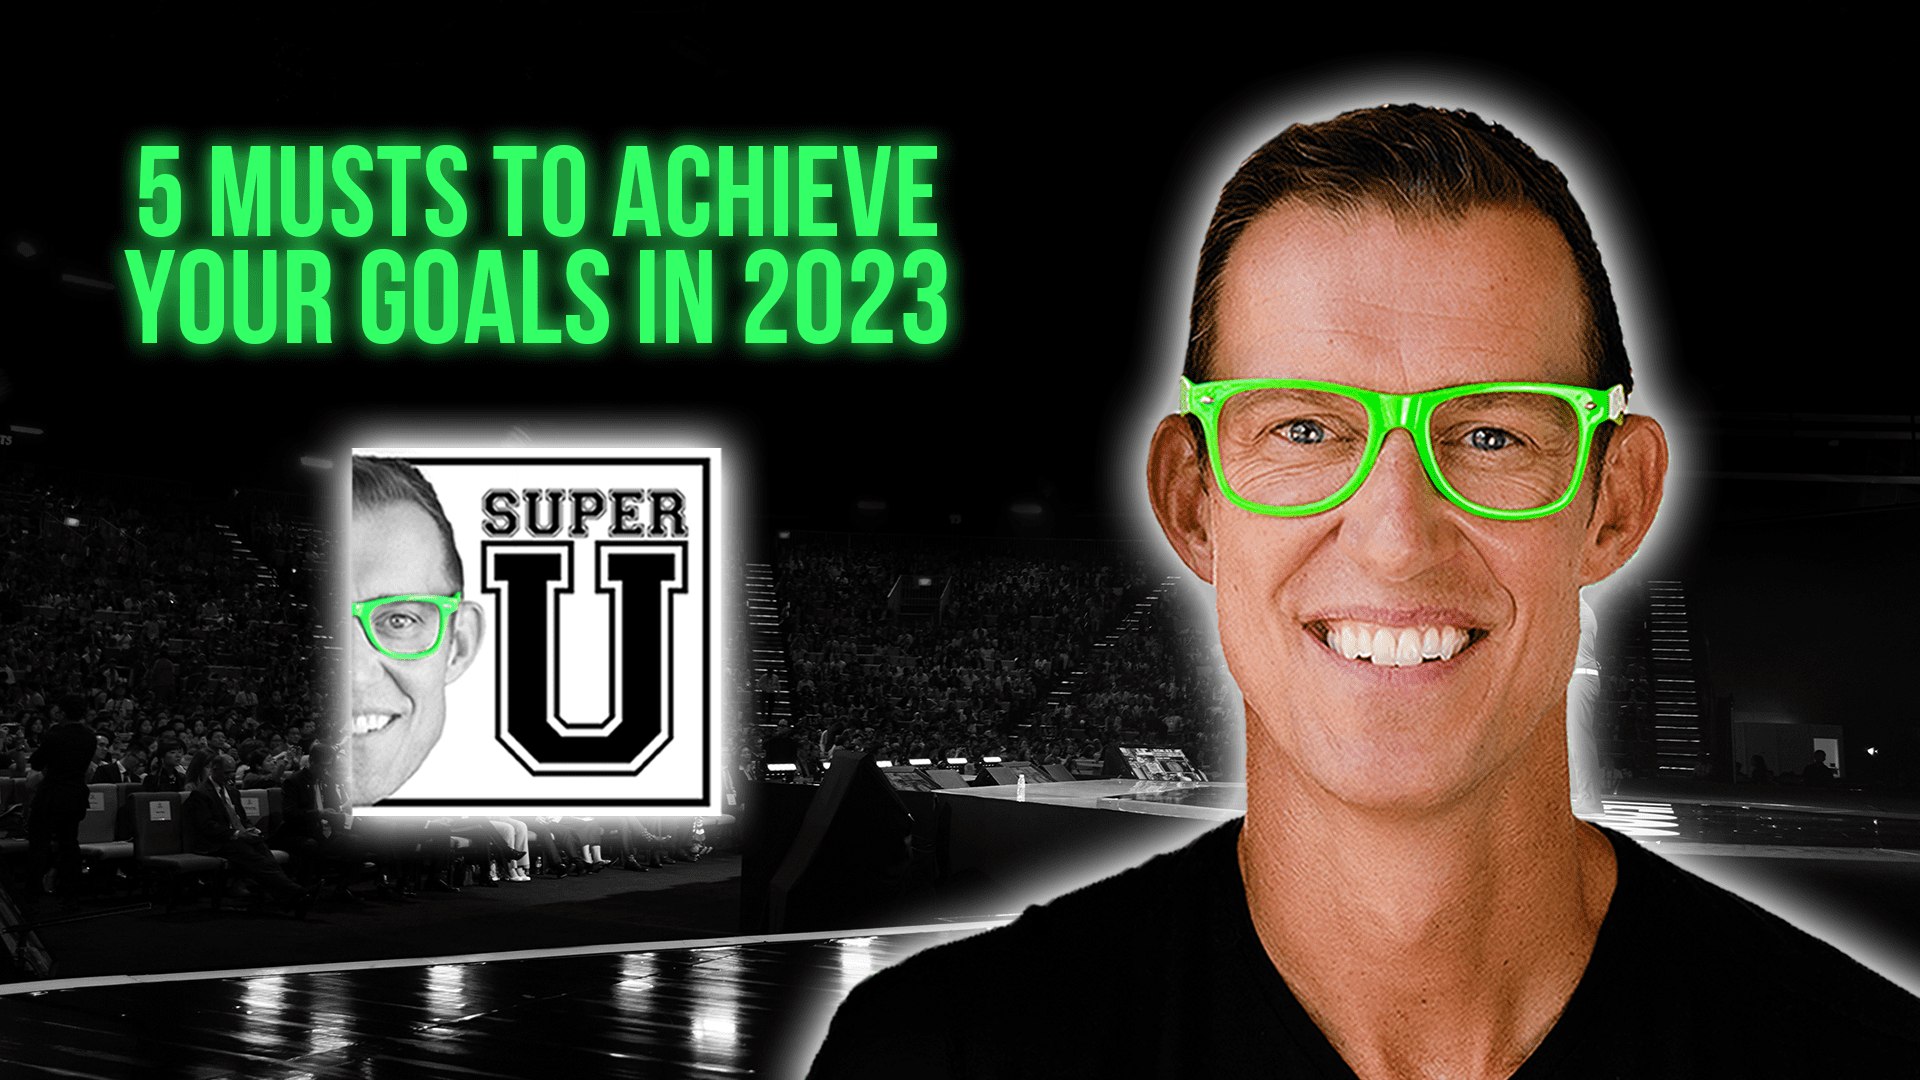 super-u-podcast-5-musts-to-achieve-your-goals-in-2023